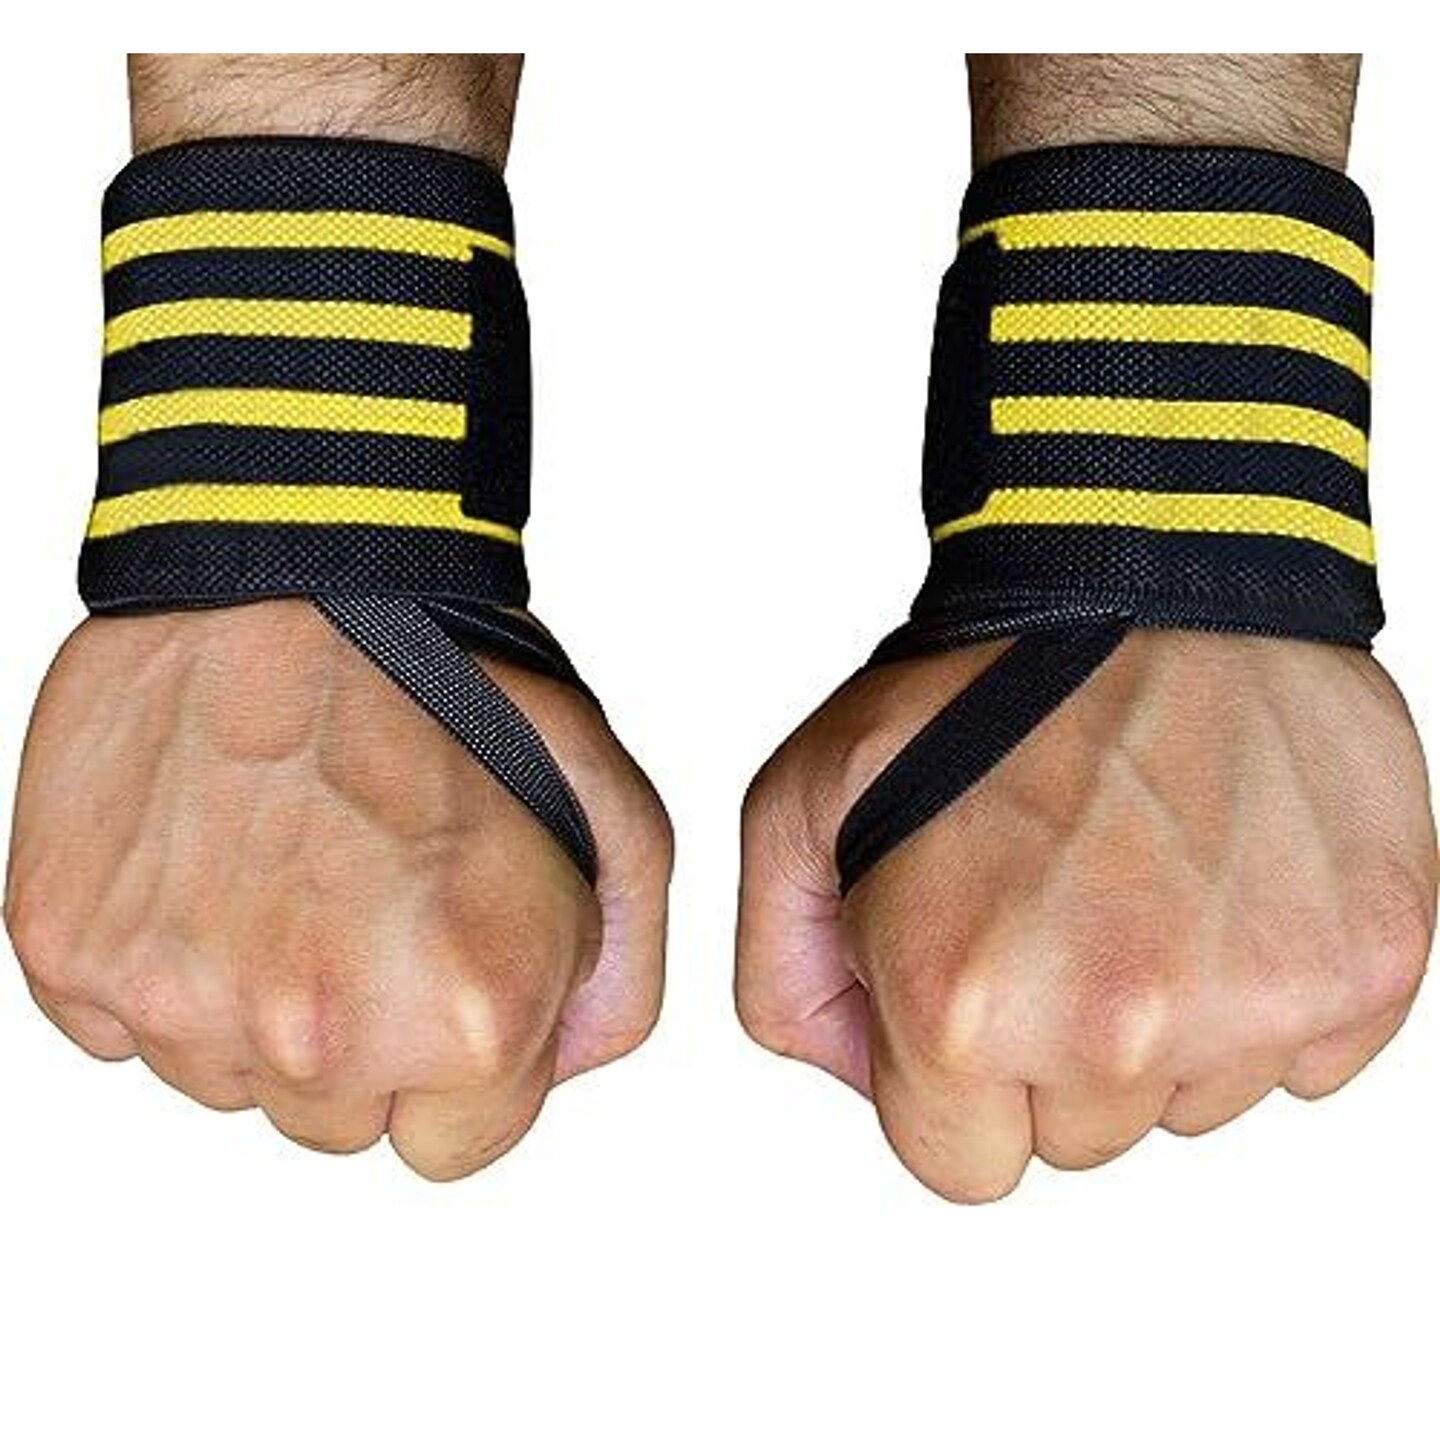 WOD Nation Wrist Wraps &#x26; Straps for Gym &#x26; Weightlifting (18 inch) - Essential Weight Lifting Wrist Wraps &#x26; Gym Wrist Straps Support for Optimal Powerlifting Performance For Women &#x26; Men - Black/Yellow